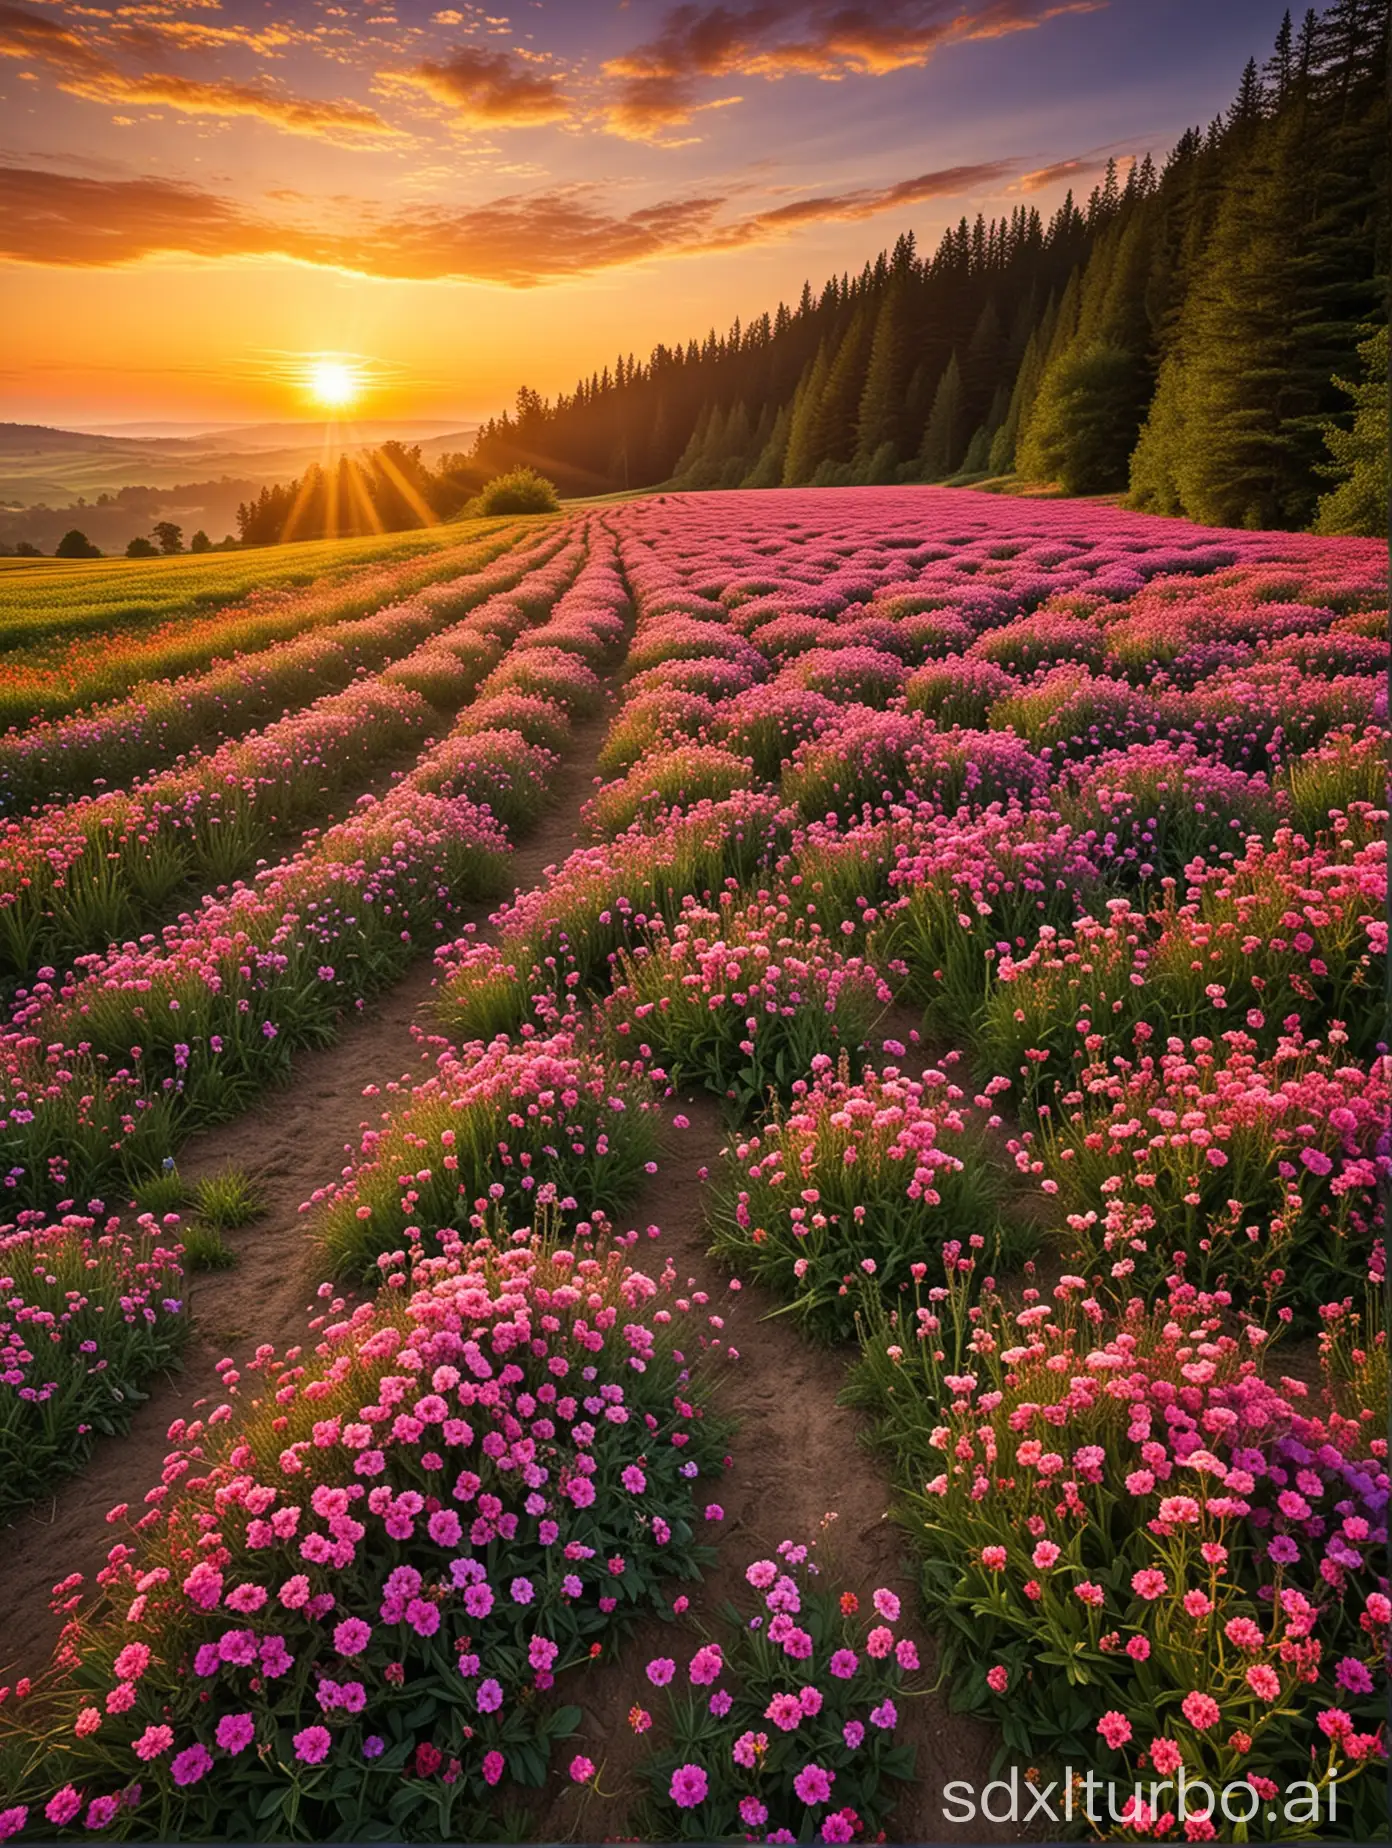 1. Lush nature images: Show stunning landscapes such as flower fields, lush forests, stunning sunrises and sunsets, to convey the idea of ​​abundance and vitality.